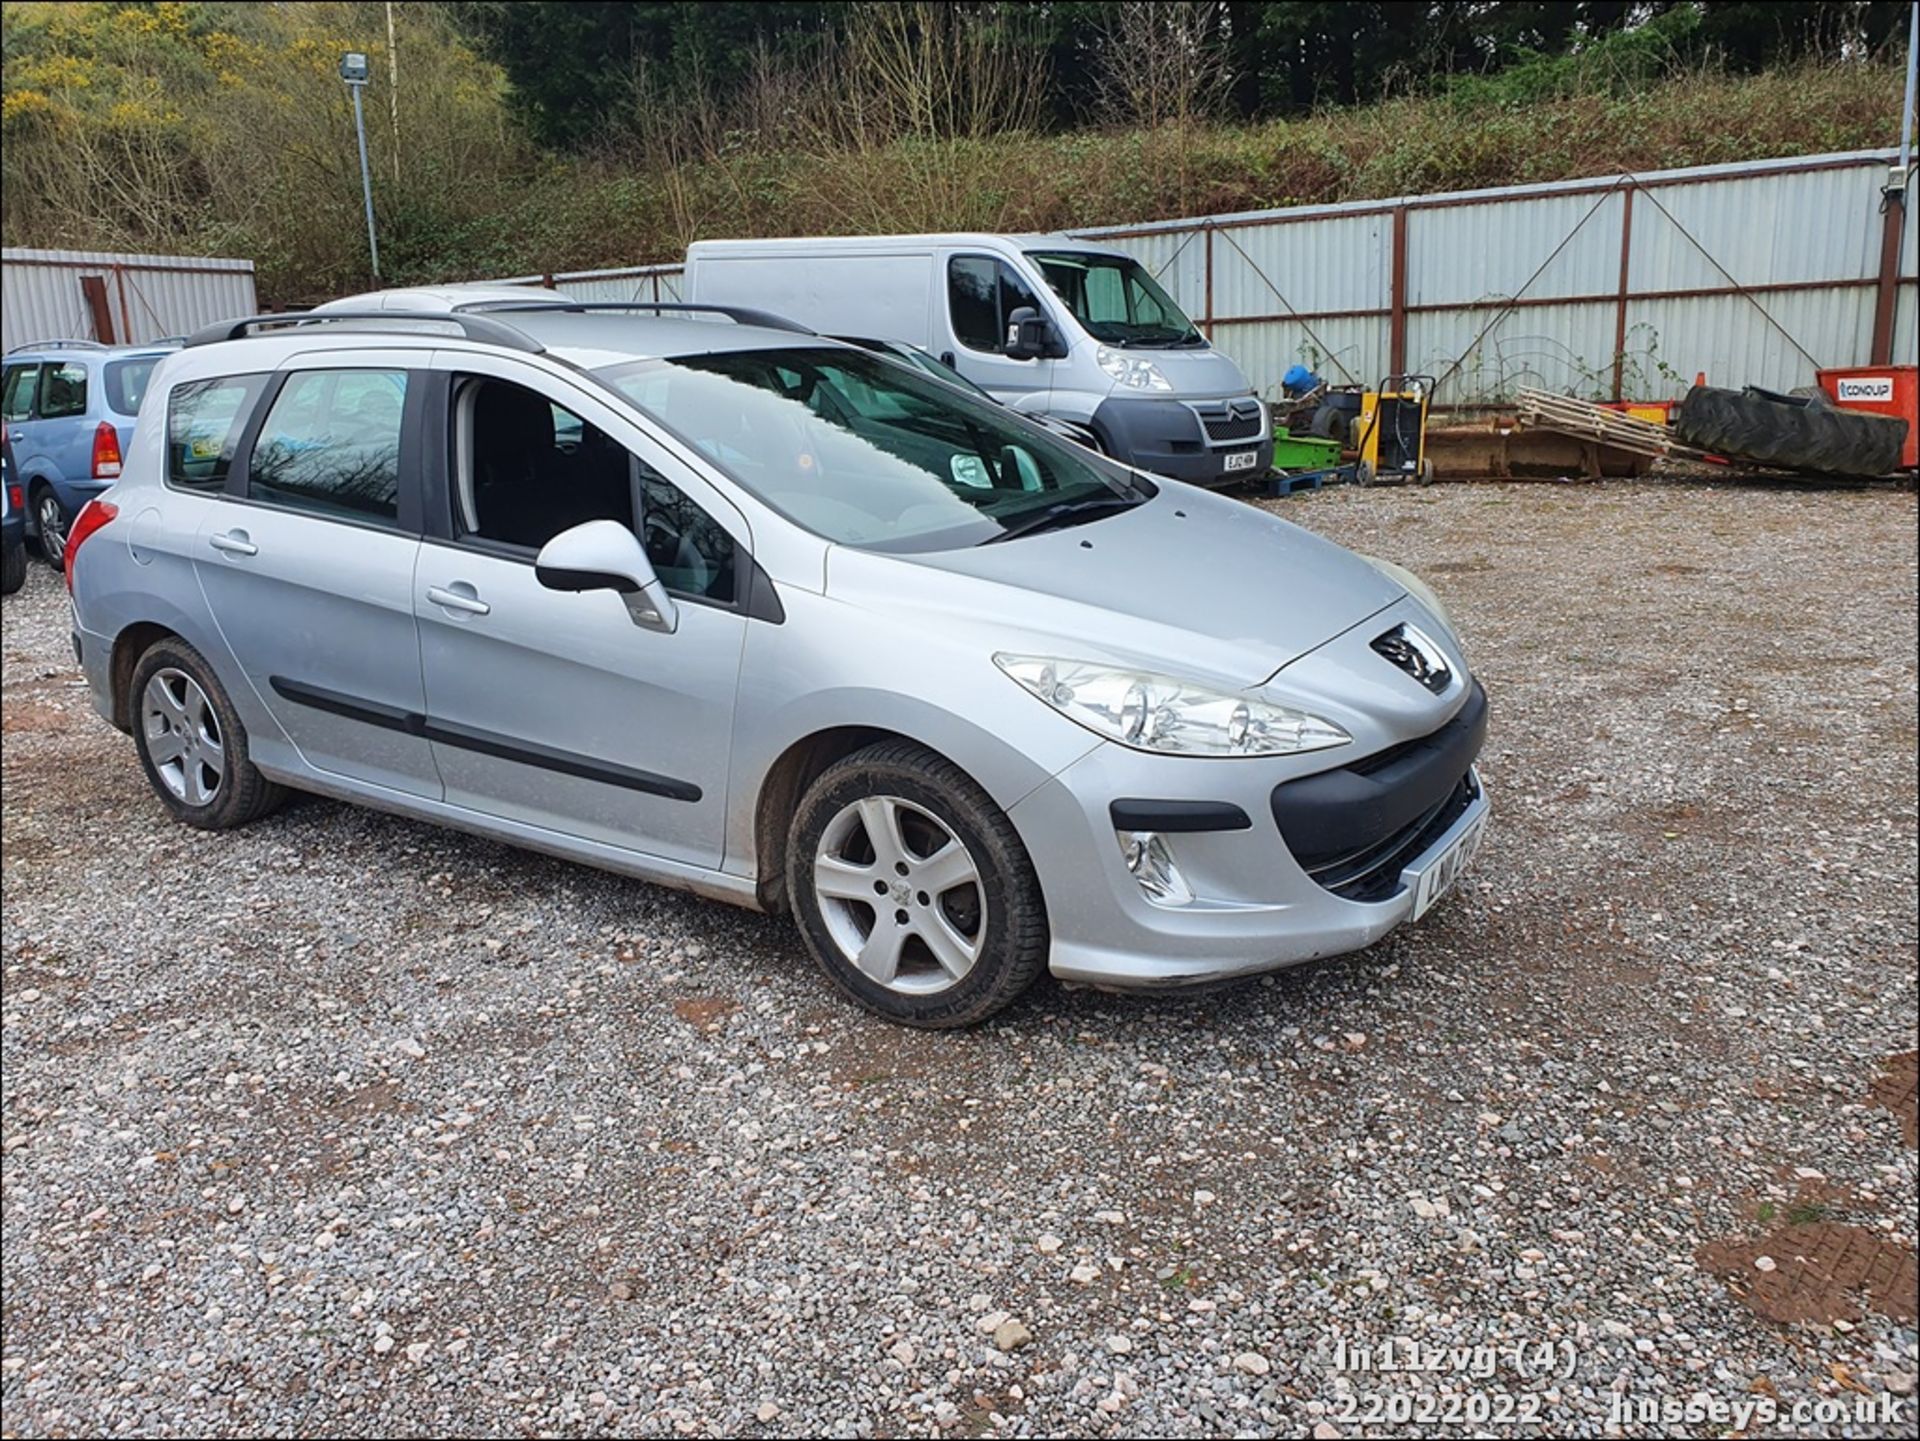 11/11 PEUGEOT 308 S SW HDI 92 - 1560cc 5dr Estate (Silver, 115k) - Image 5 of 46